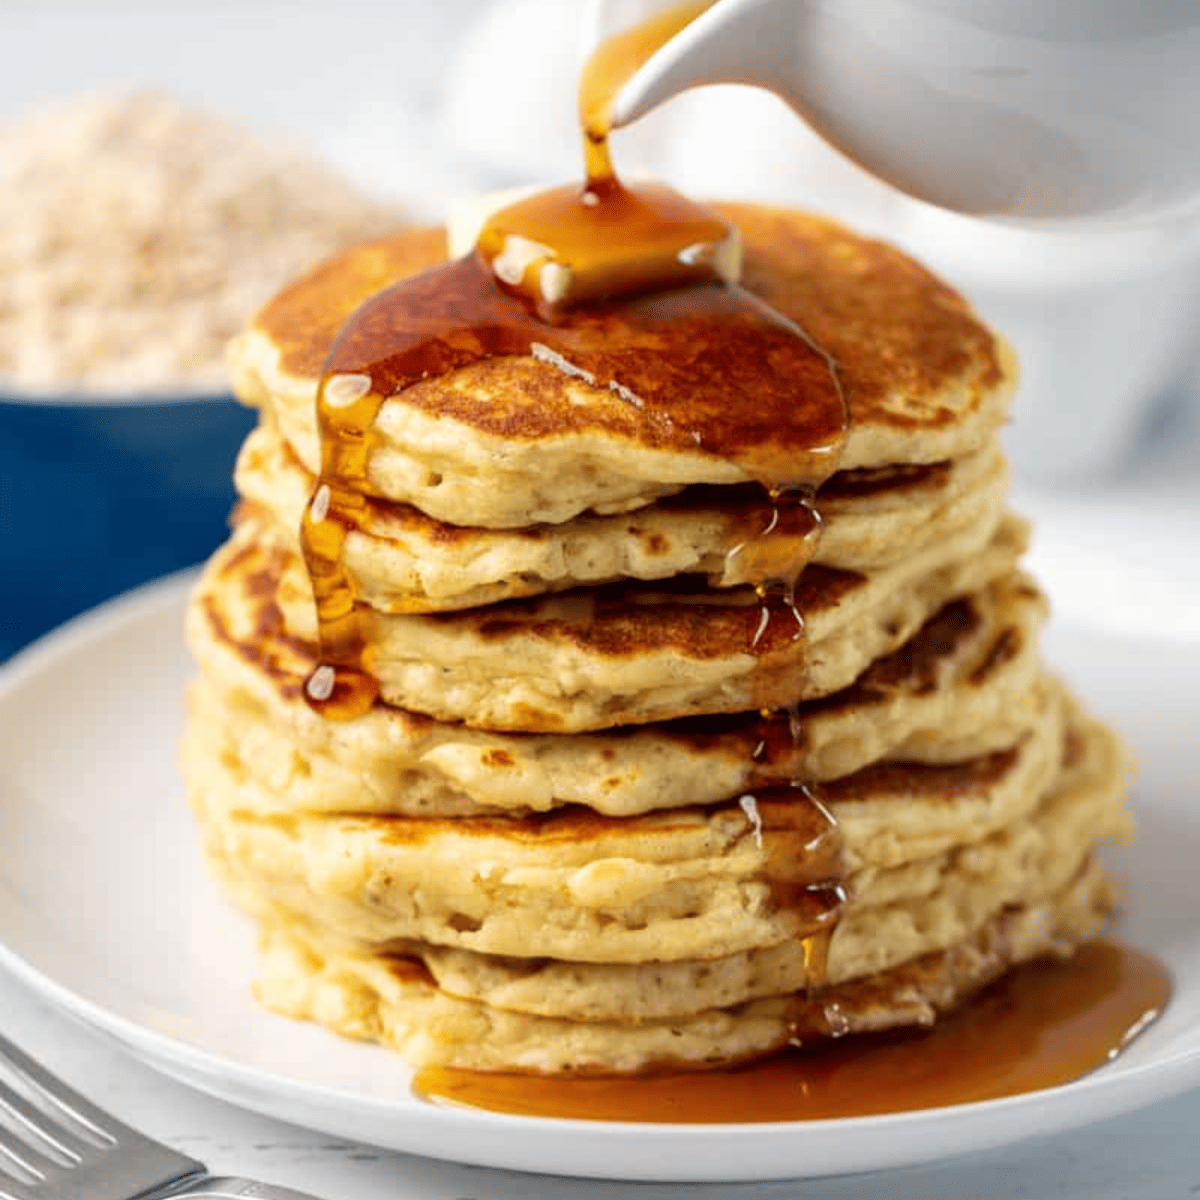 Stack of oatmeal pancakes with syrup being poured on top.